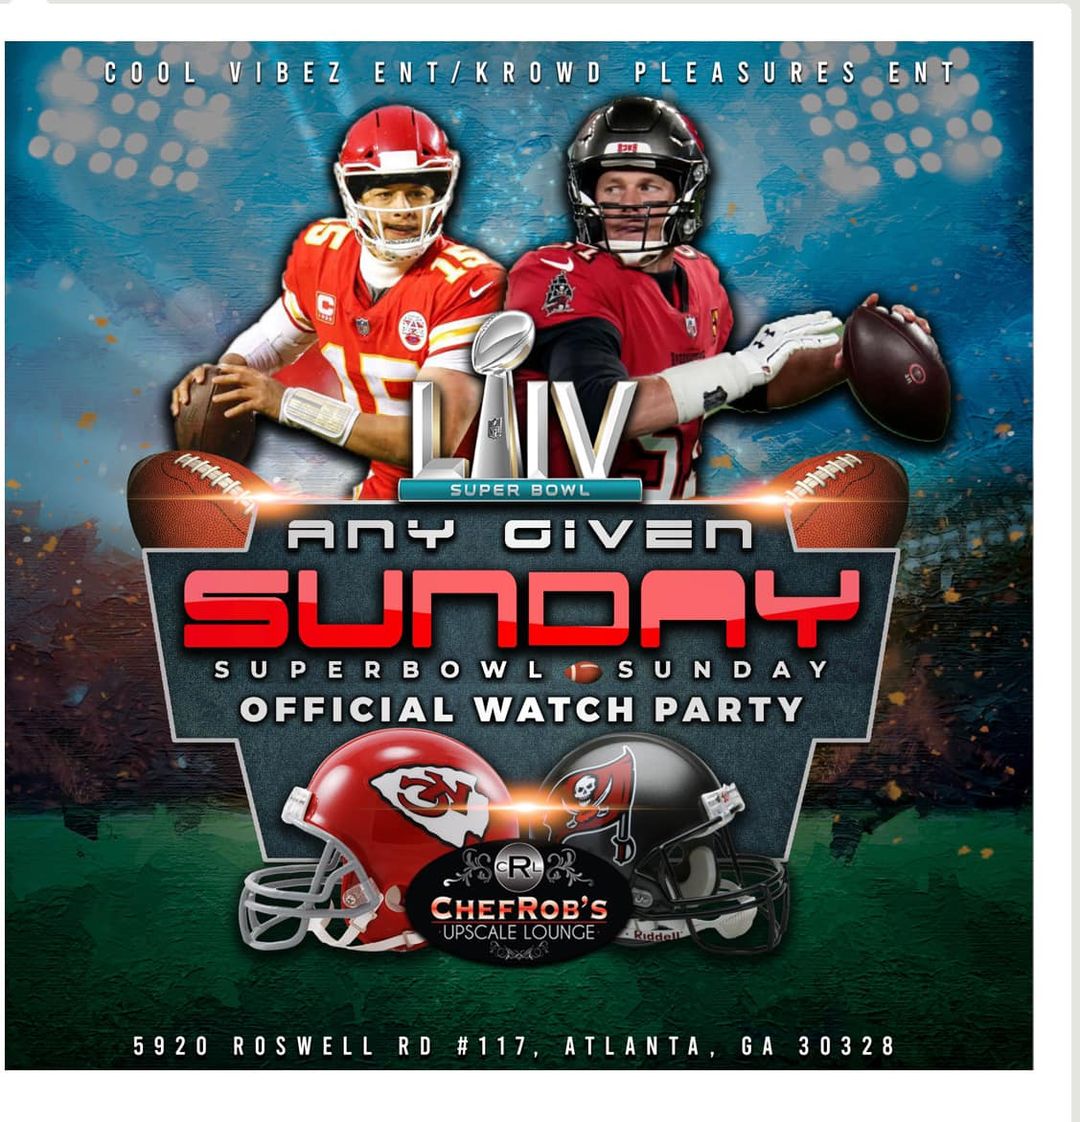 SUPERBOWL SUNDAY WATCH PARTY!